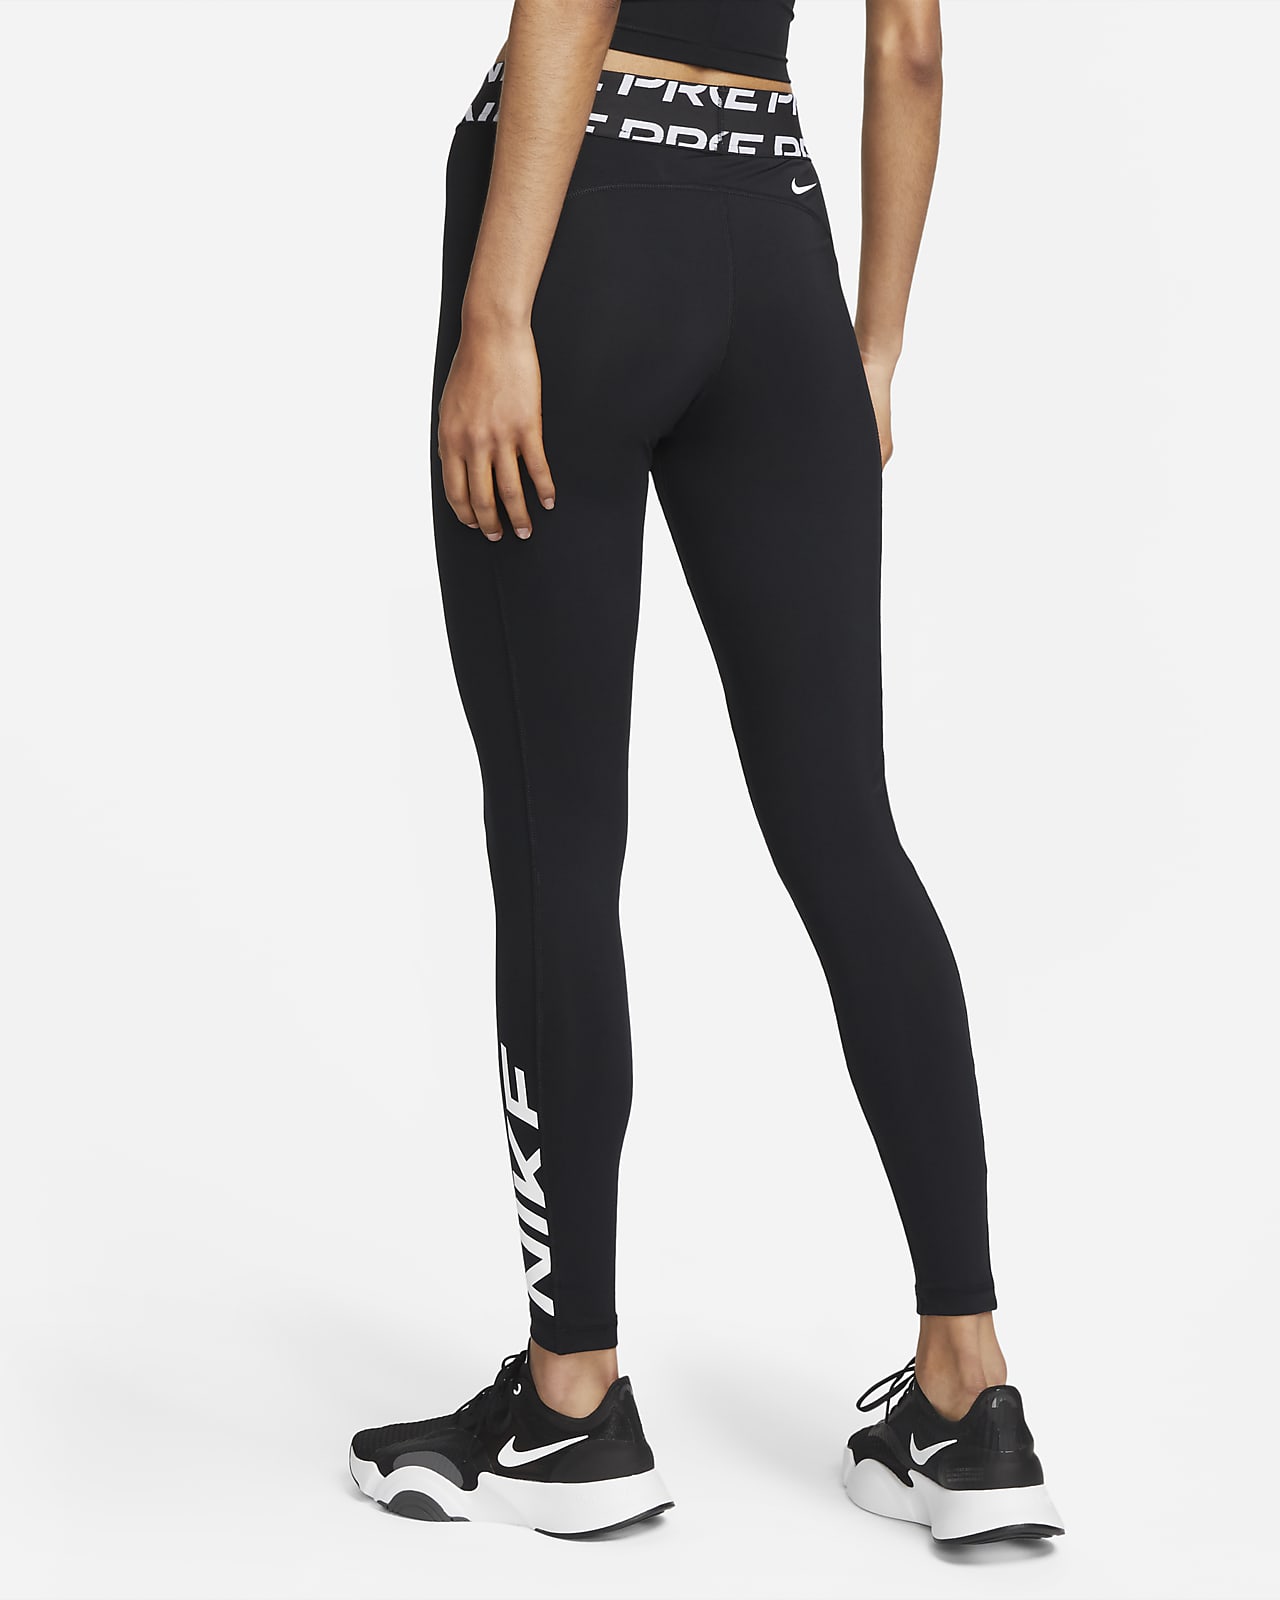 Nike Women's Pro 365 Tights | Dick's Sporting Goods